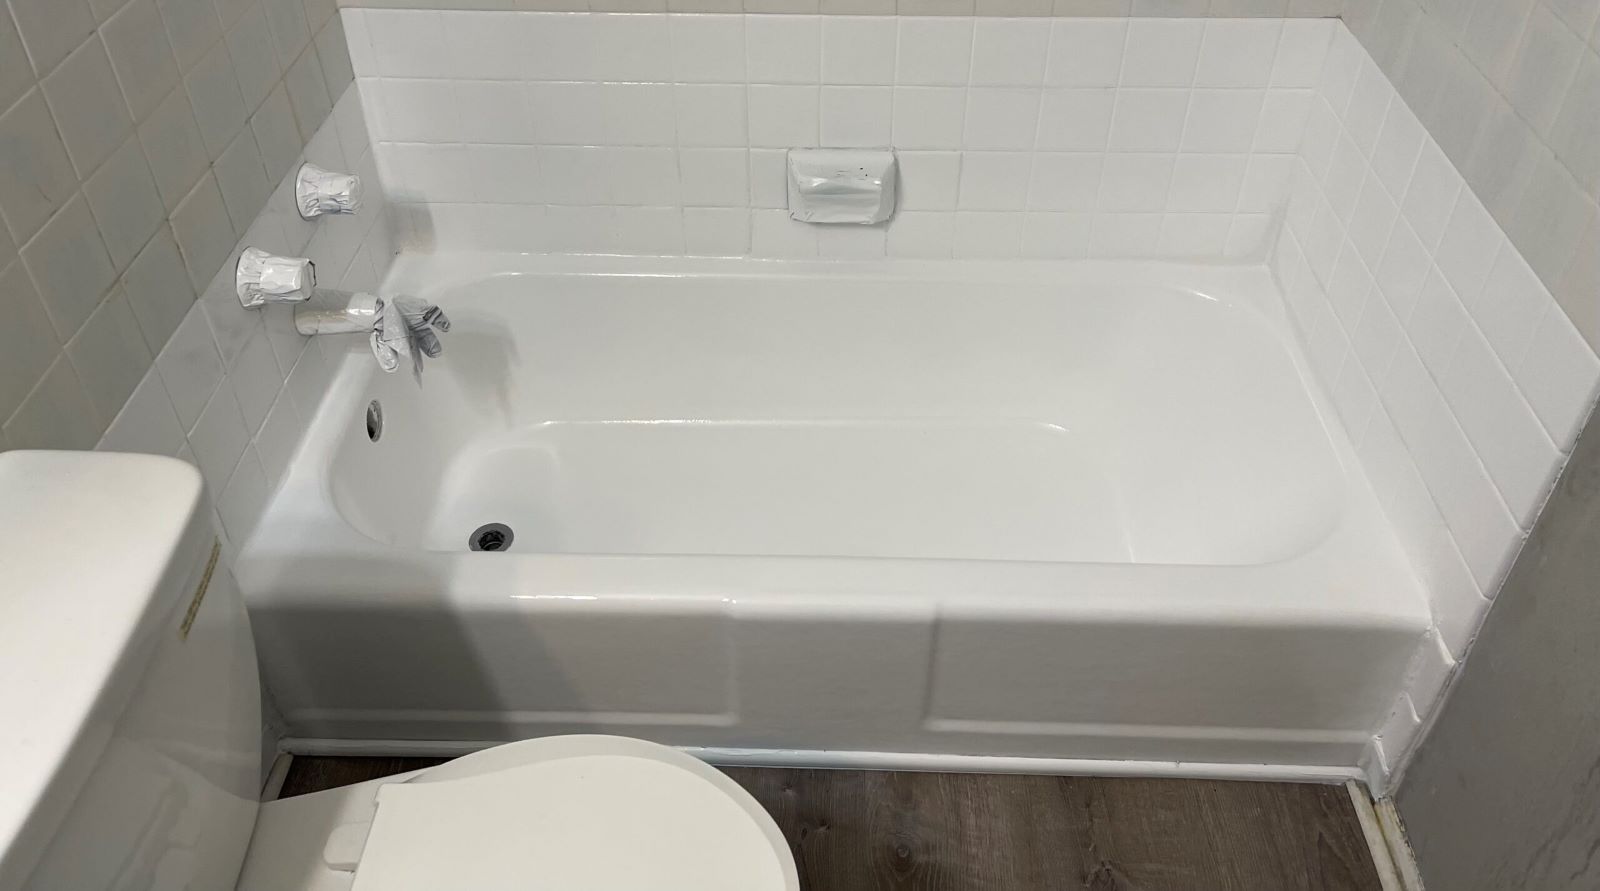 Low Cost Bathtub Refinishing in St. Peters, MO | Affordable Tub Reglazing Near St. Peters